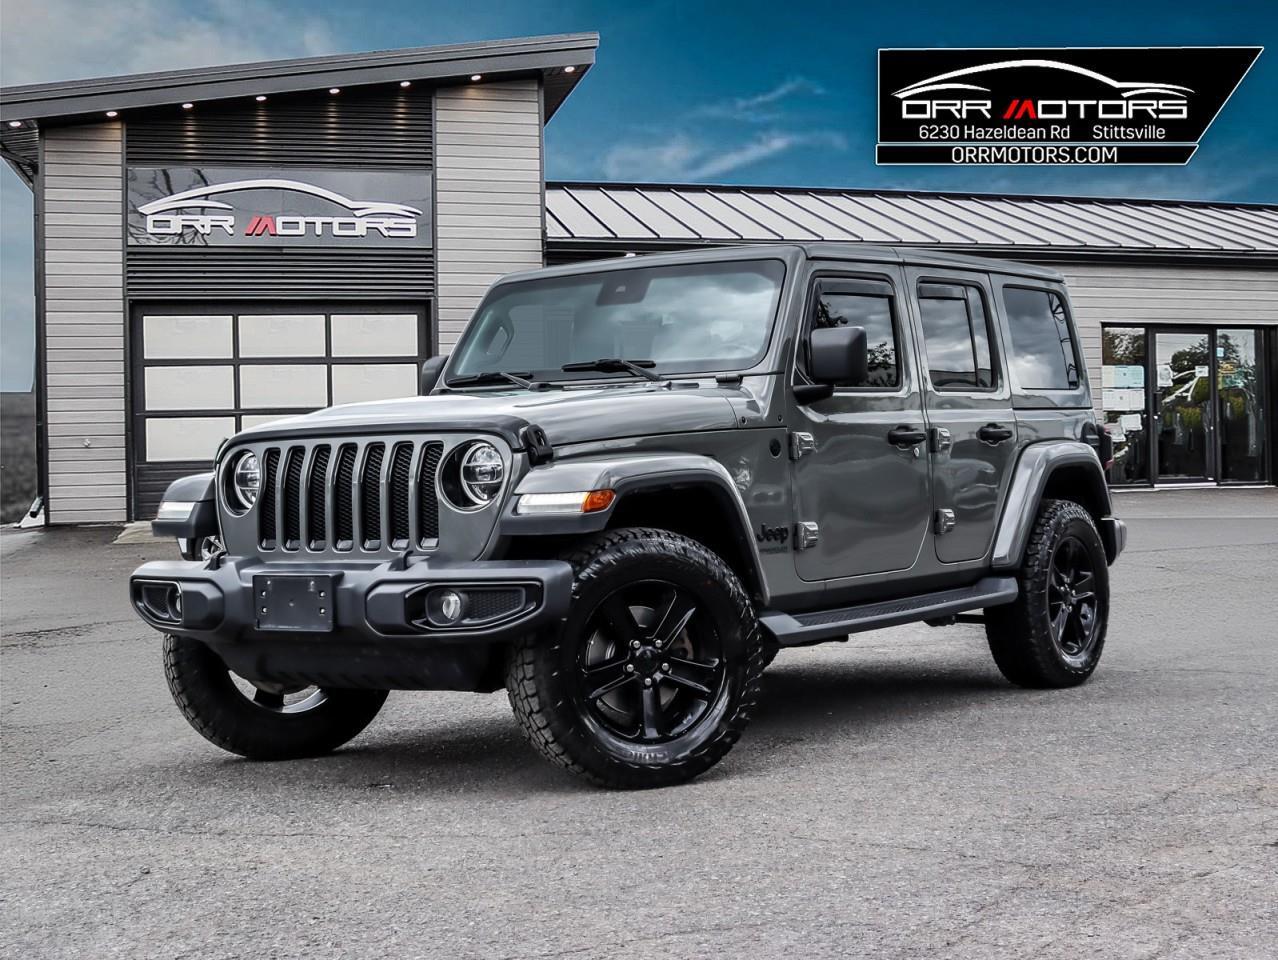 2020 Jeep WRANGLER UNLIMITED Sahara **JUST LANDED! CALL NOW TO RESERVE IT!**